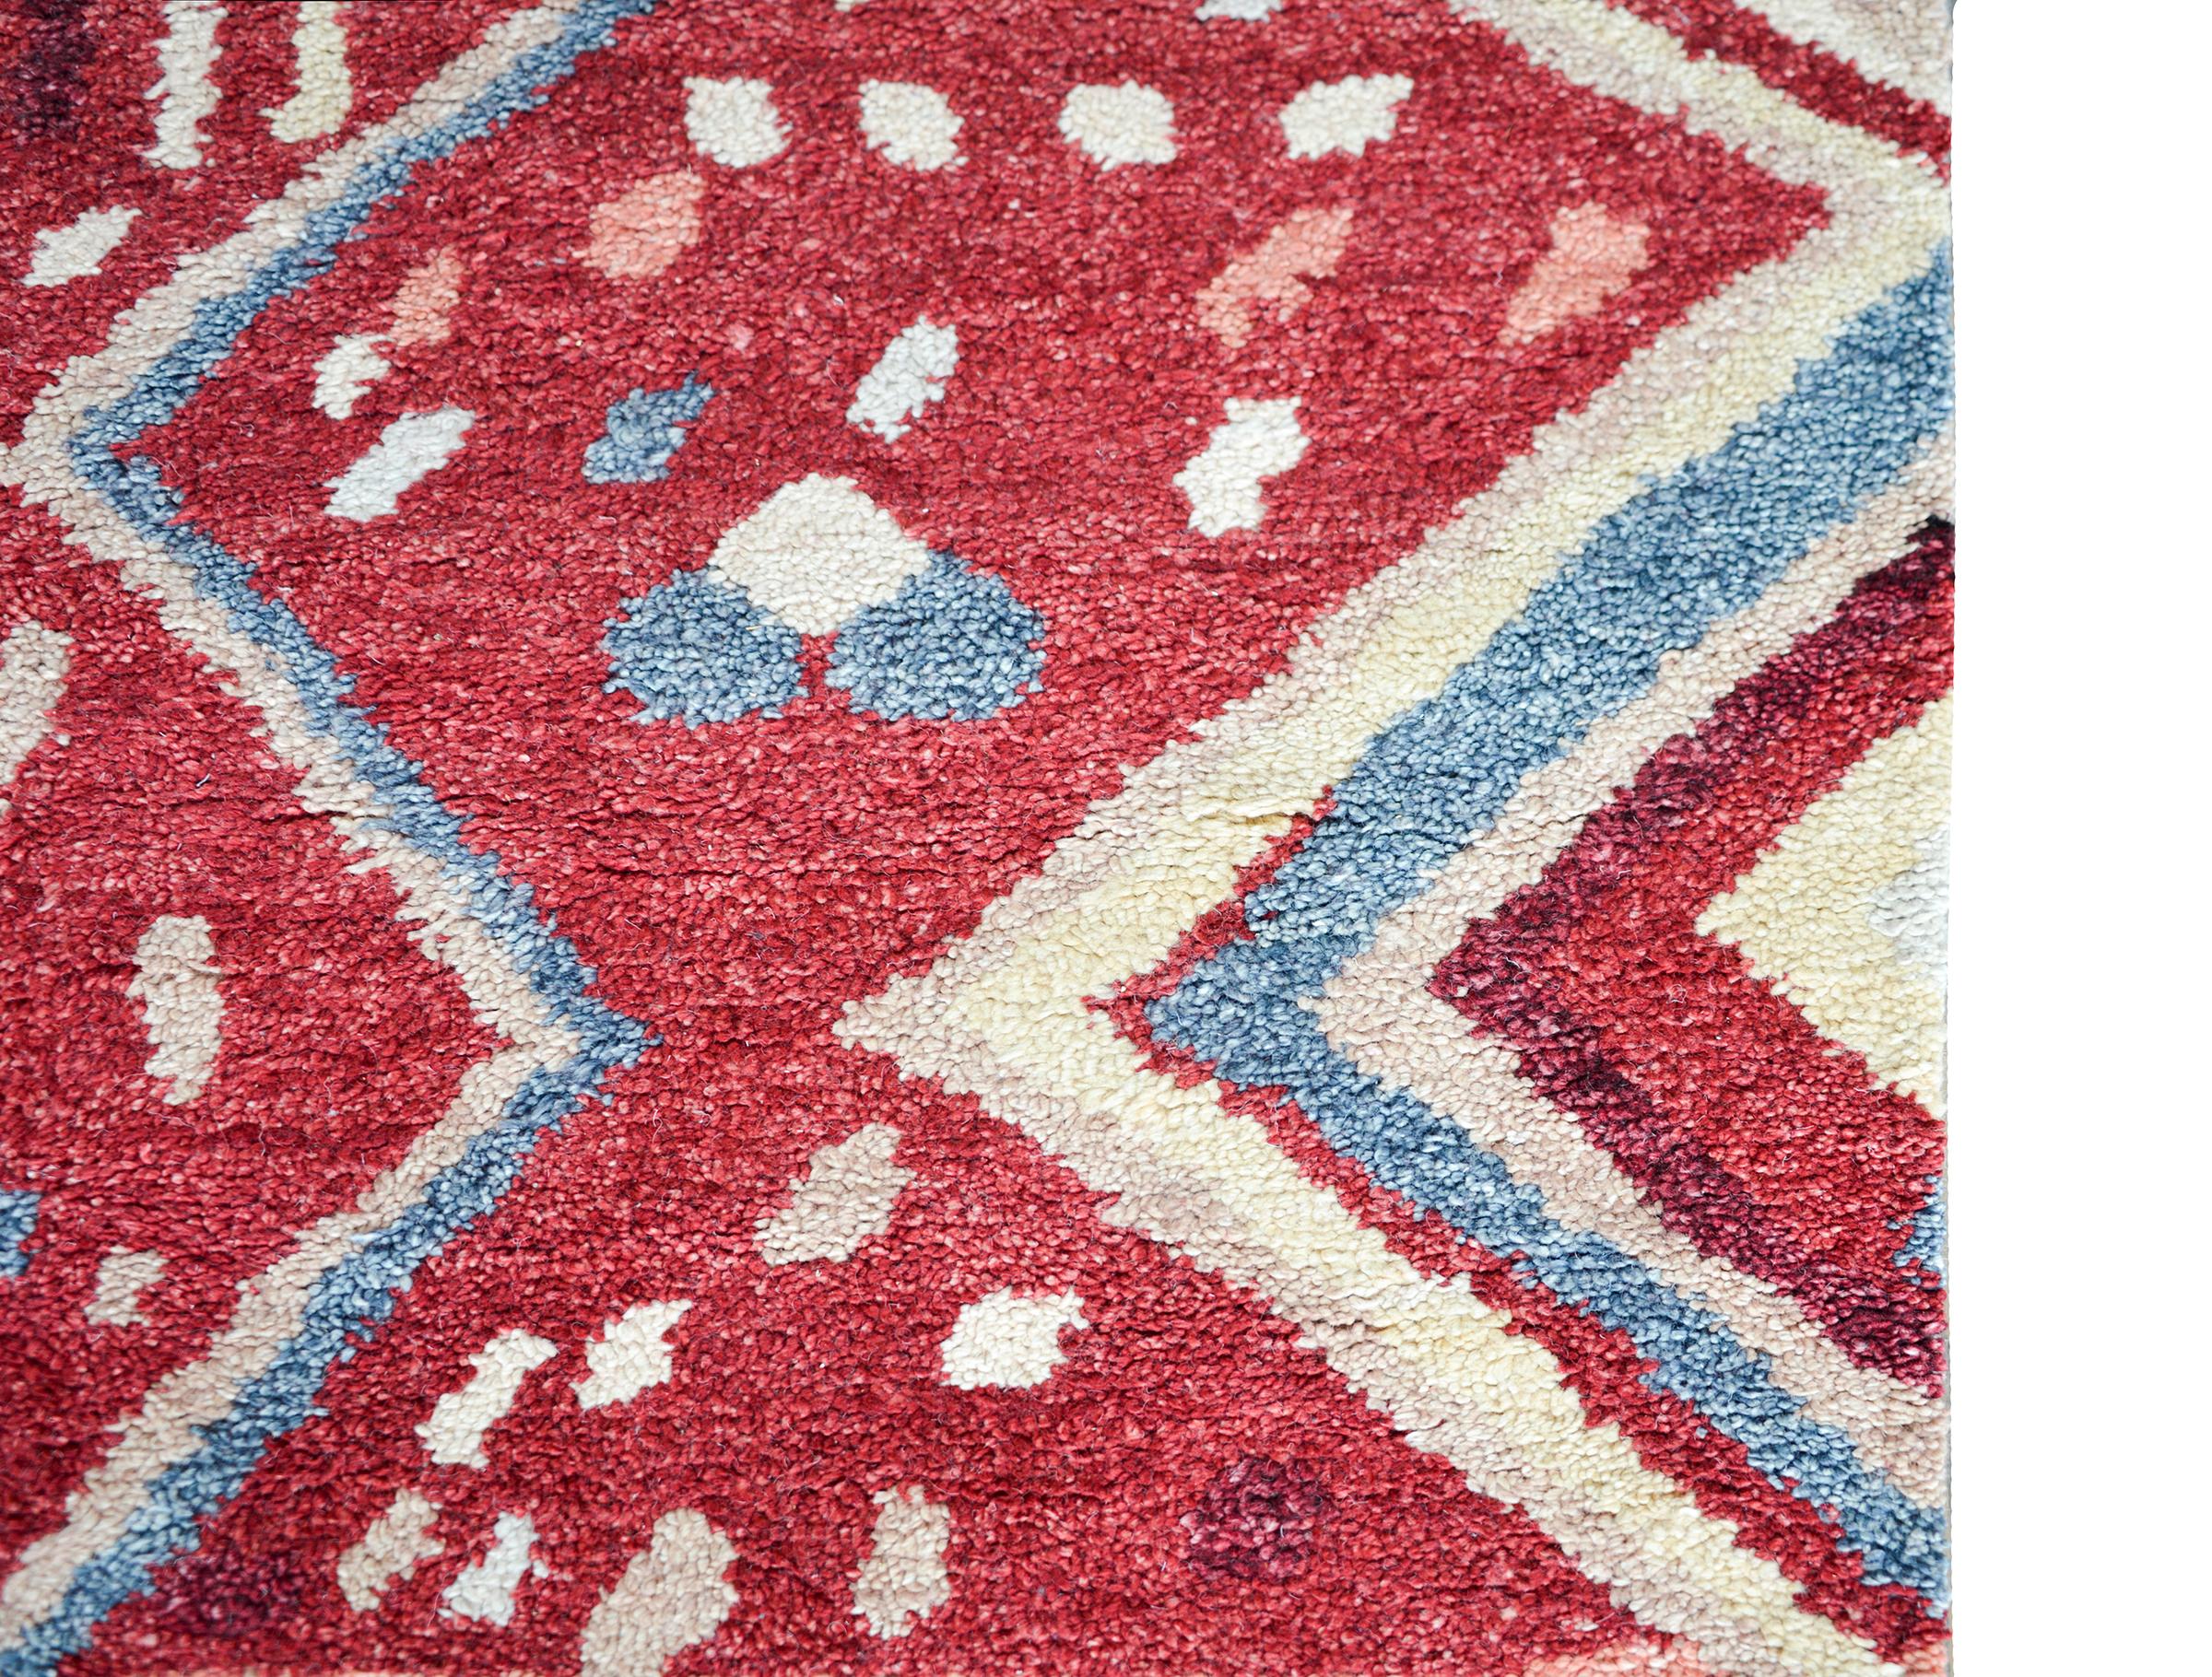 A beautiful Moroccan rug with a modernist geometric pattern containing multiple light indigo and white zigzag stripes against a light and dark cranberry background with more geometric patterns.